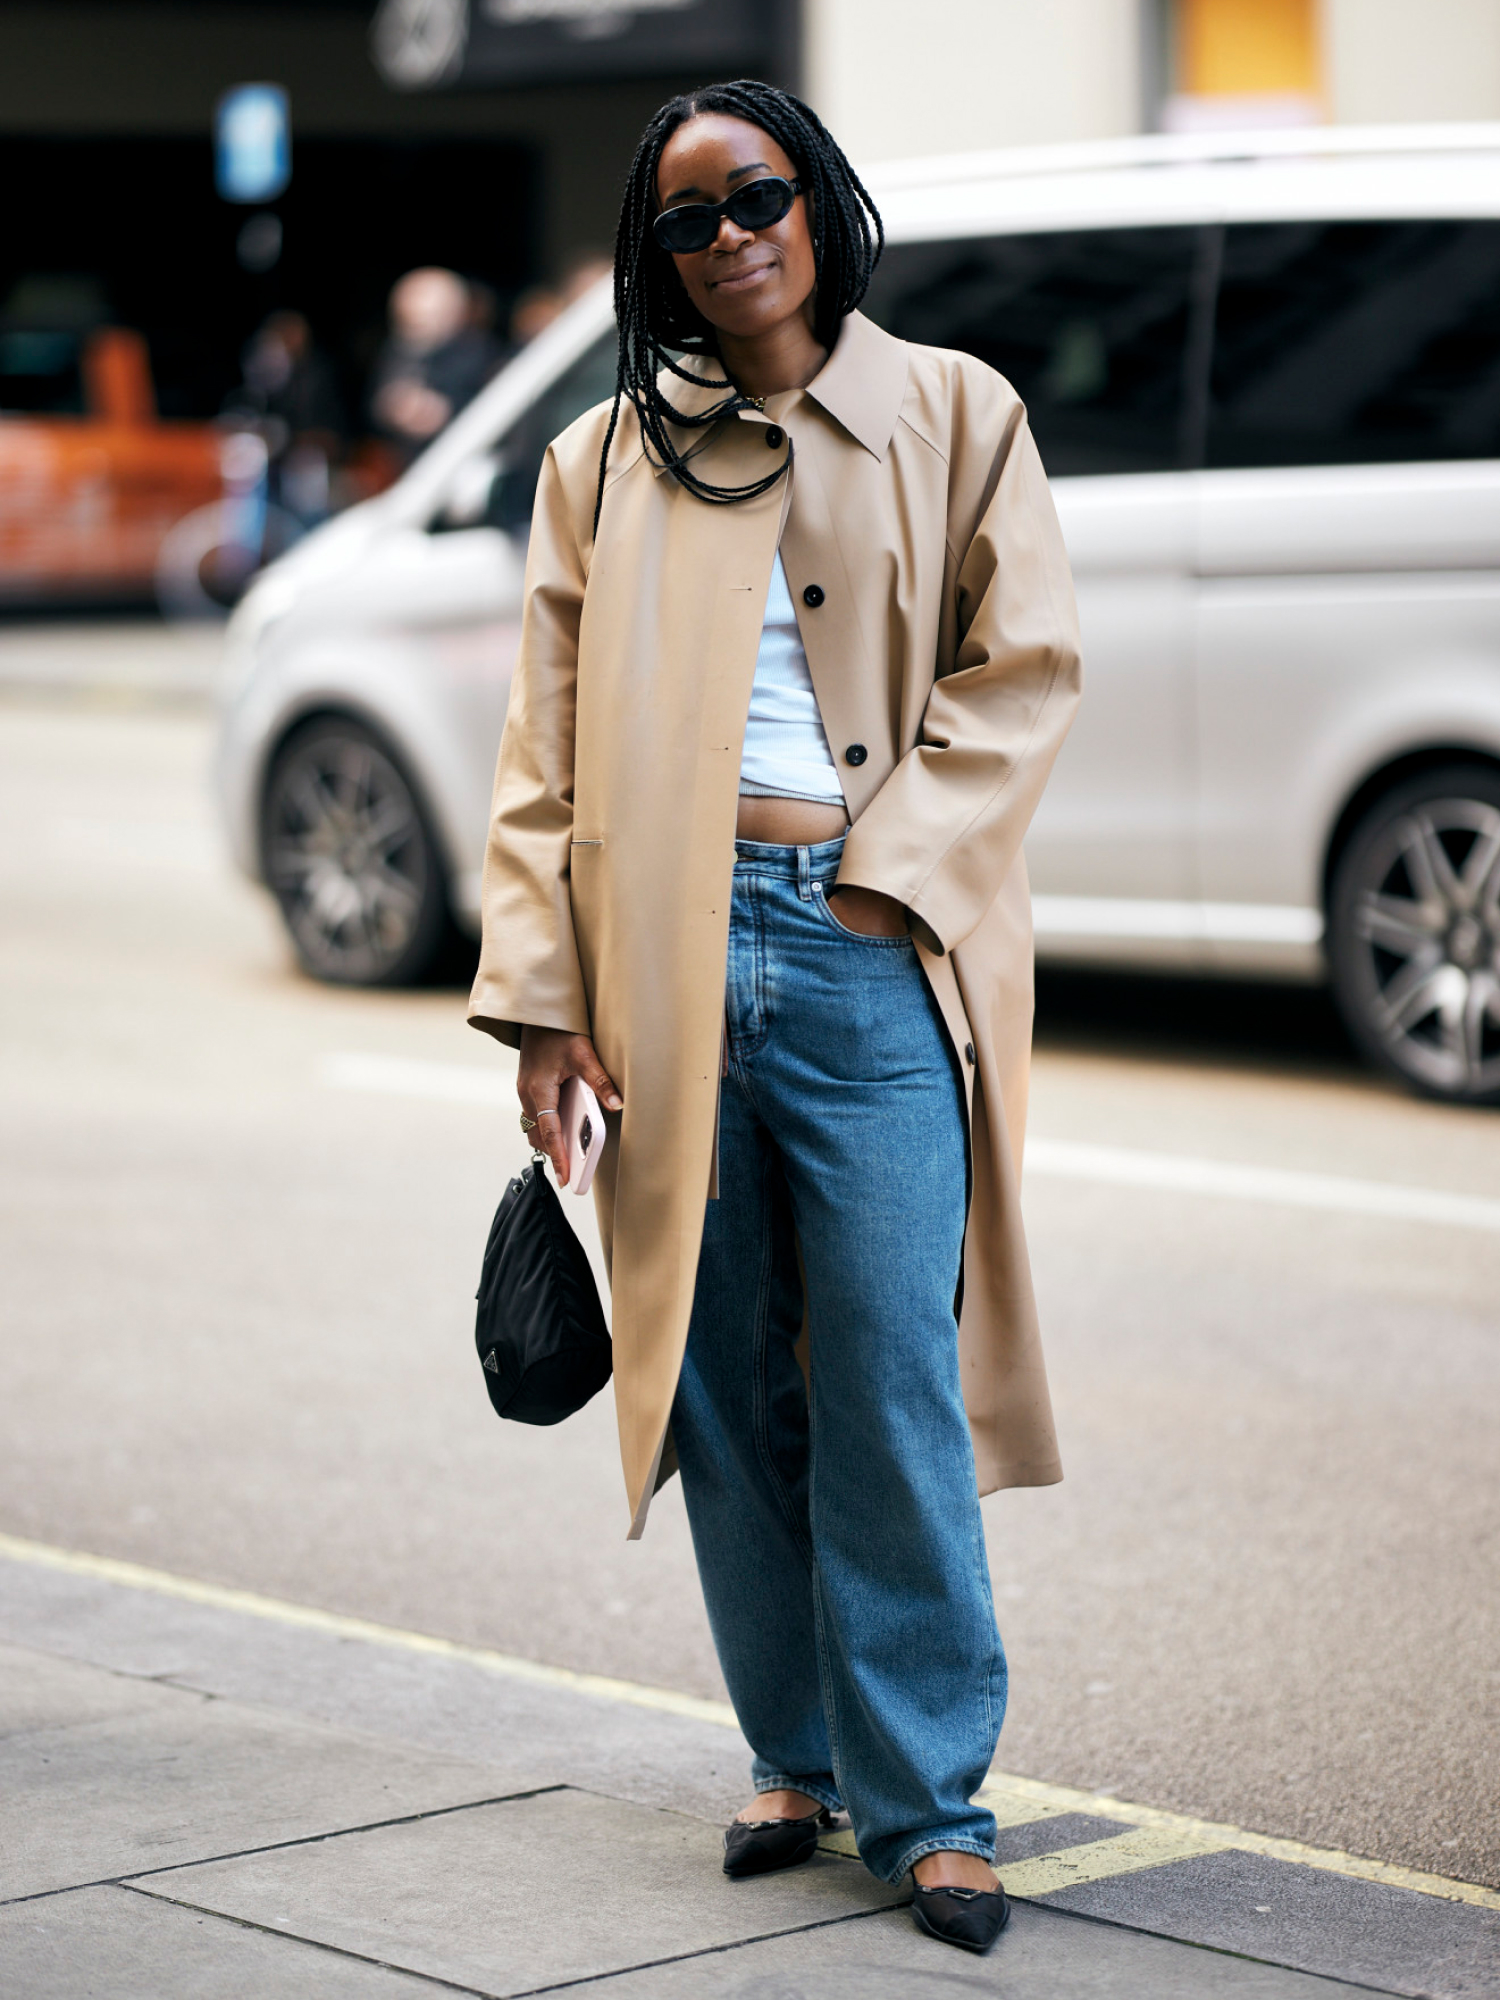 How To Wear Wide Leg Jeans According To A Denim Expert